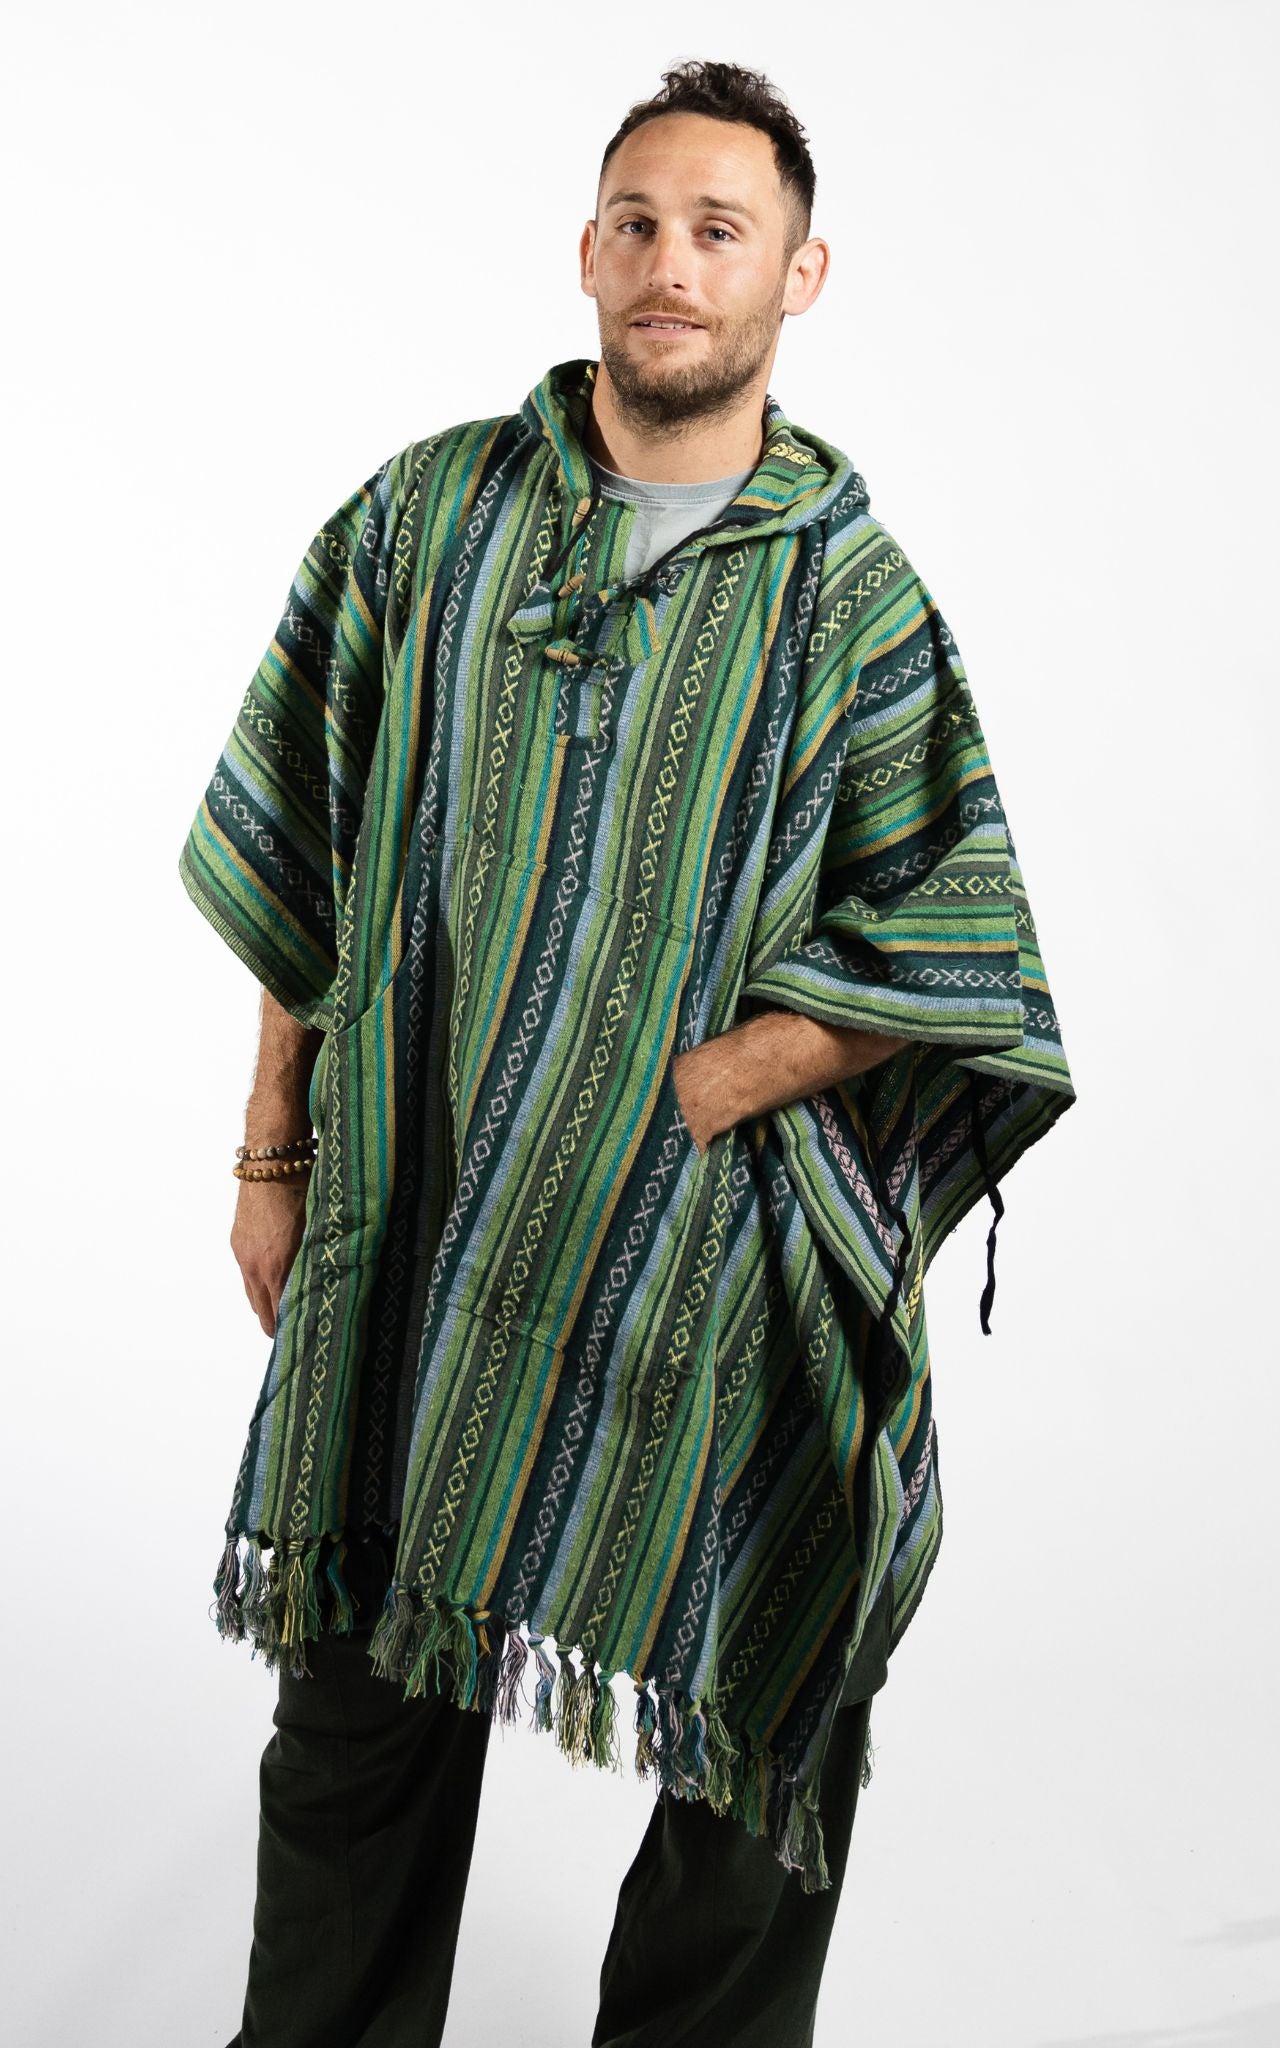 Surya Thick, Heavy Cotton Festival Poncho made in Nepal - Green